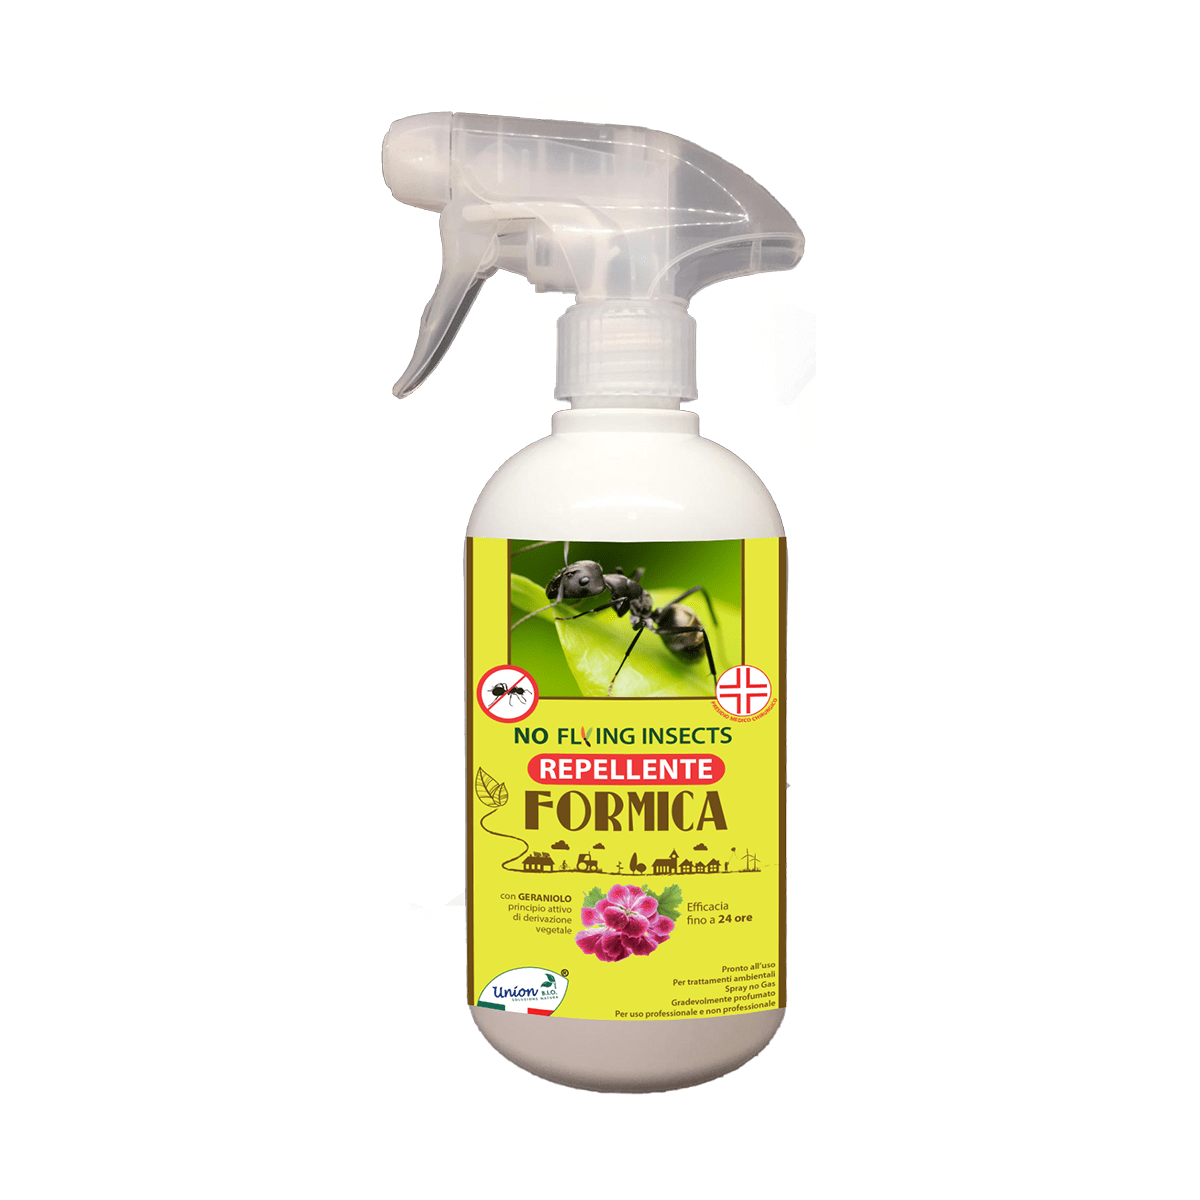 No Flying Insects Formica Repellente pronto uso 500ml